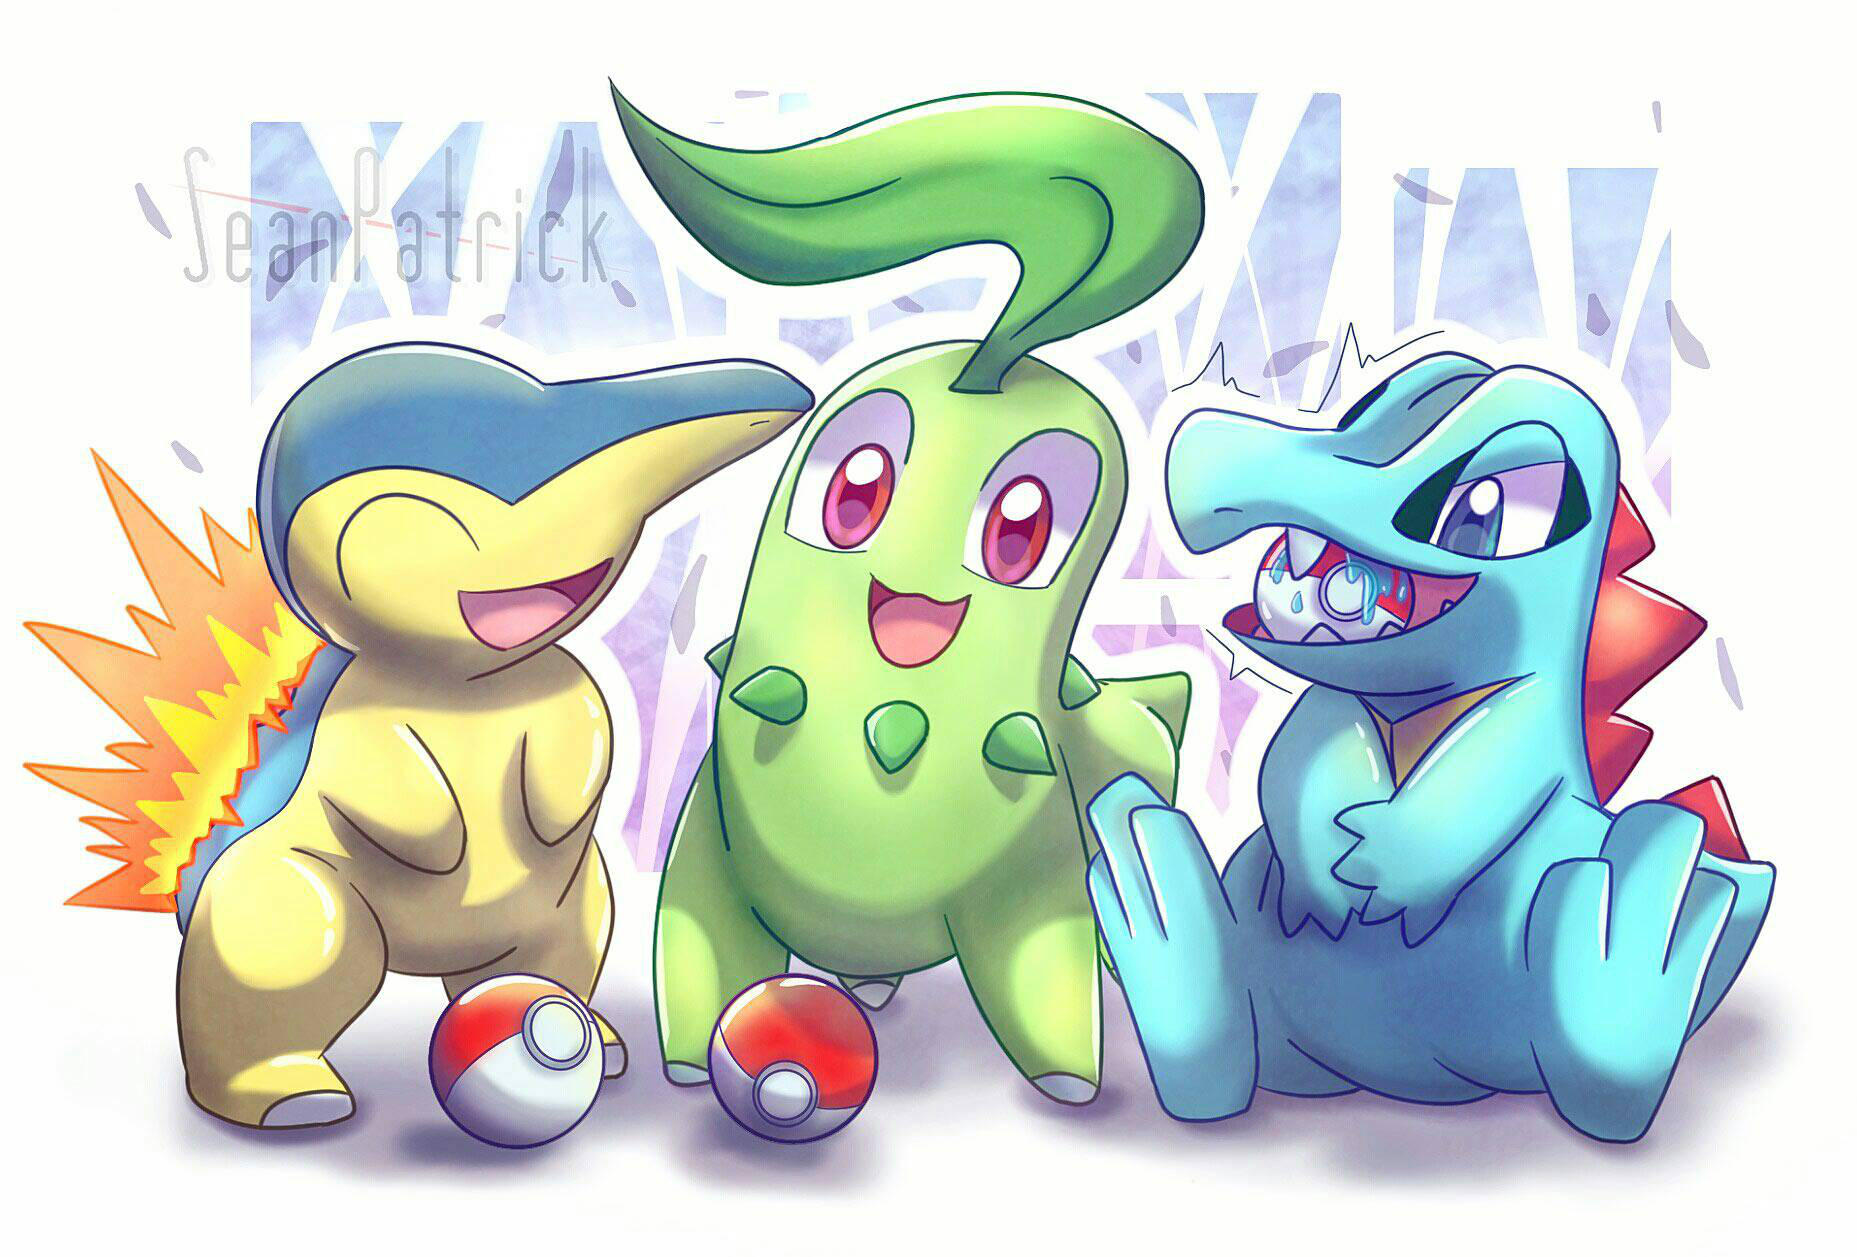 What are the Johto starters?